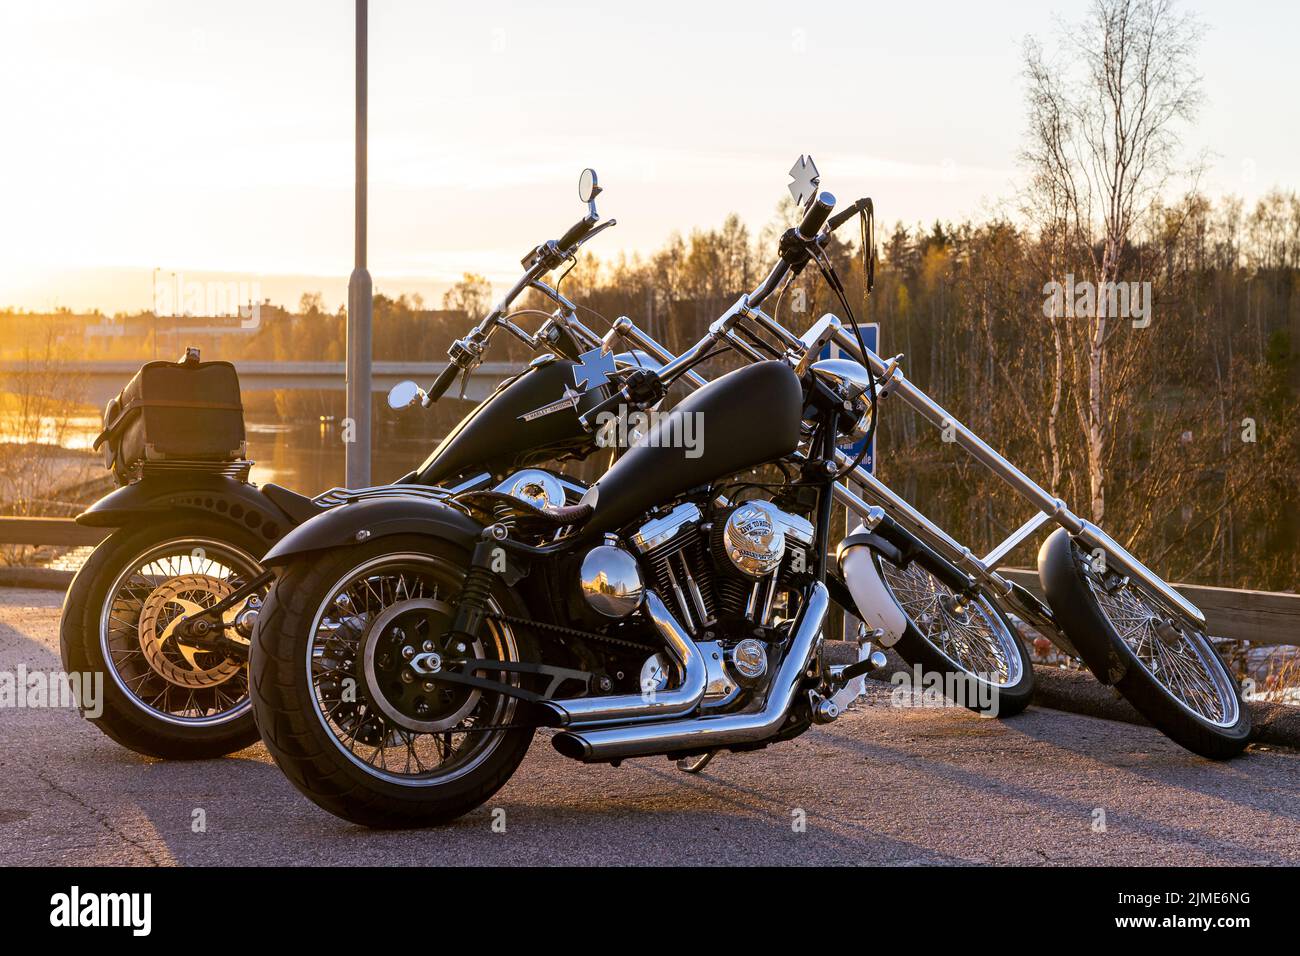 2 long fork chopper Harley Davidson motorcycles side by side in the evening sun. Not factory-made, self-built. Stock Photo